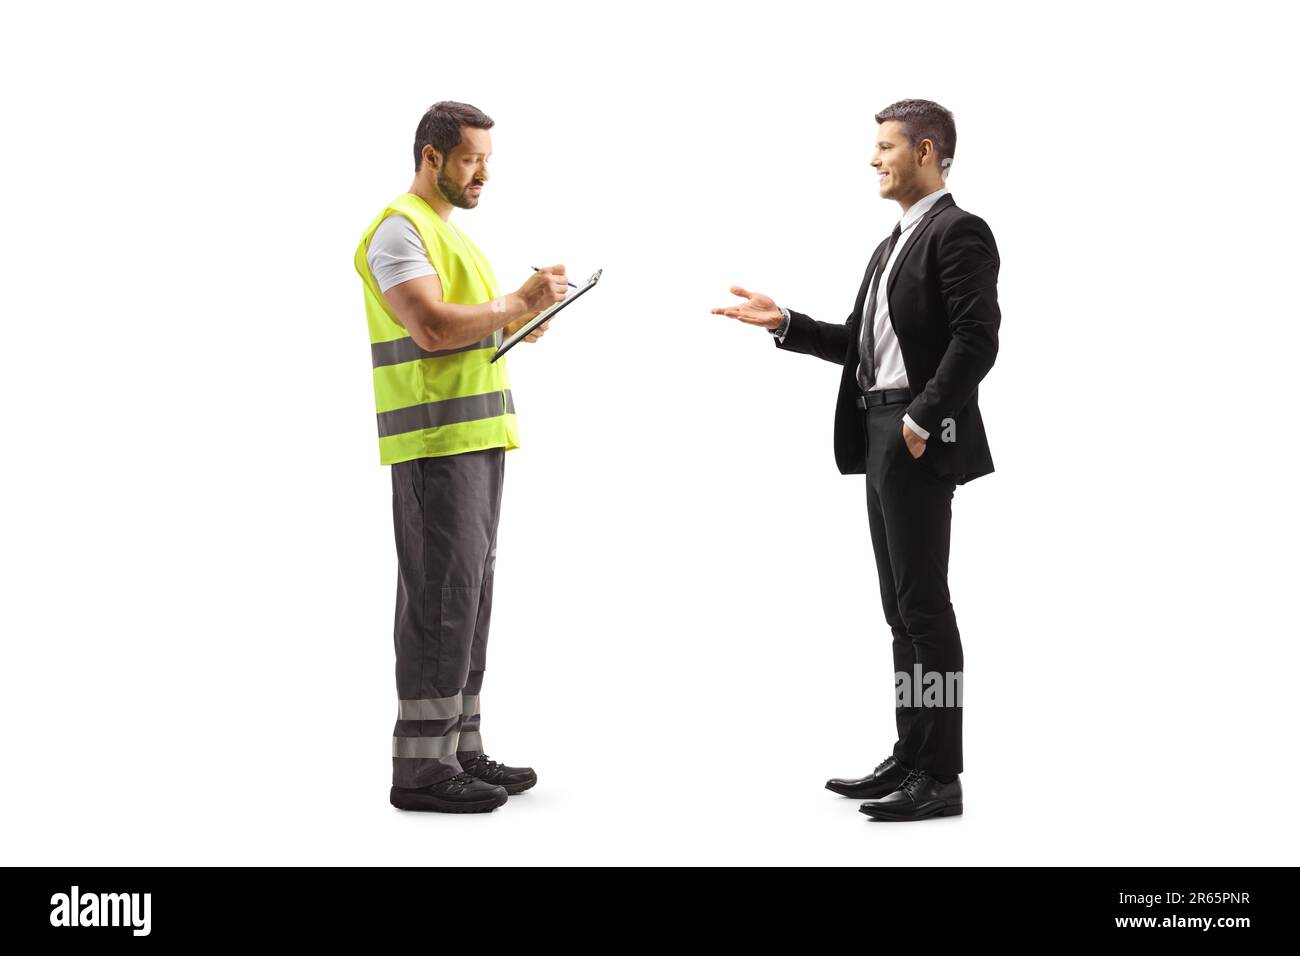 Road assistance worker in a reflective vest writing a document and talking to a businessman isolated on white background Stock Photo